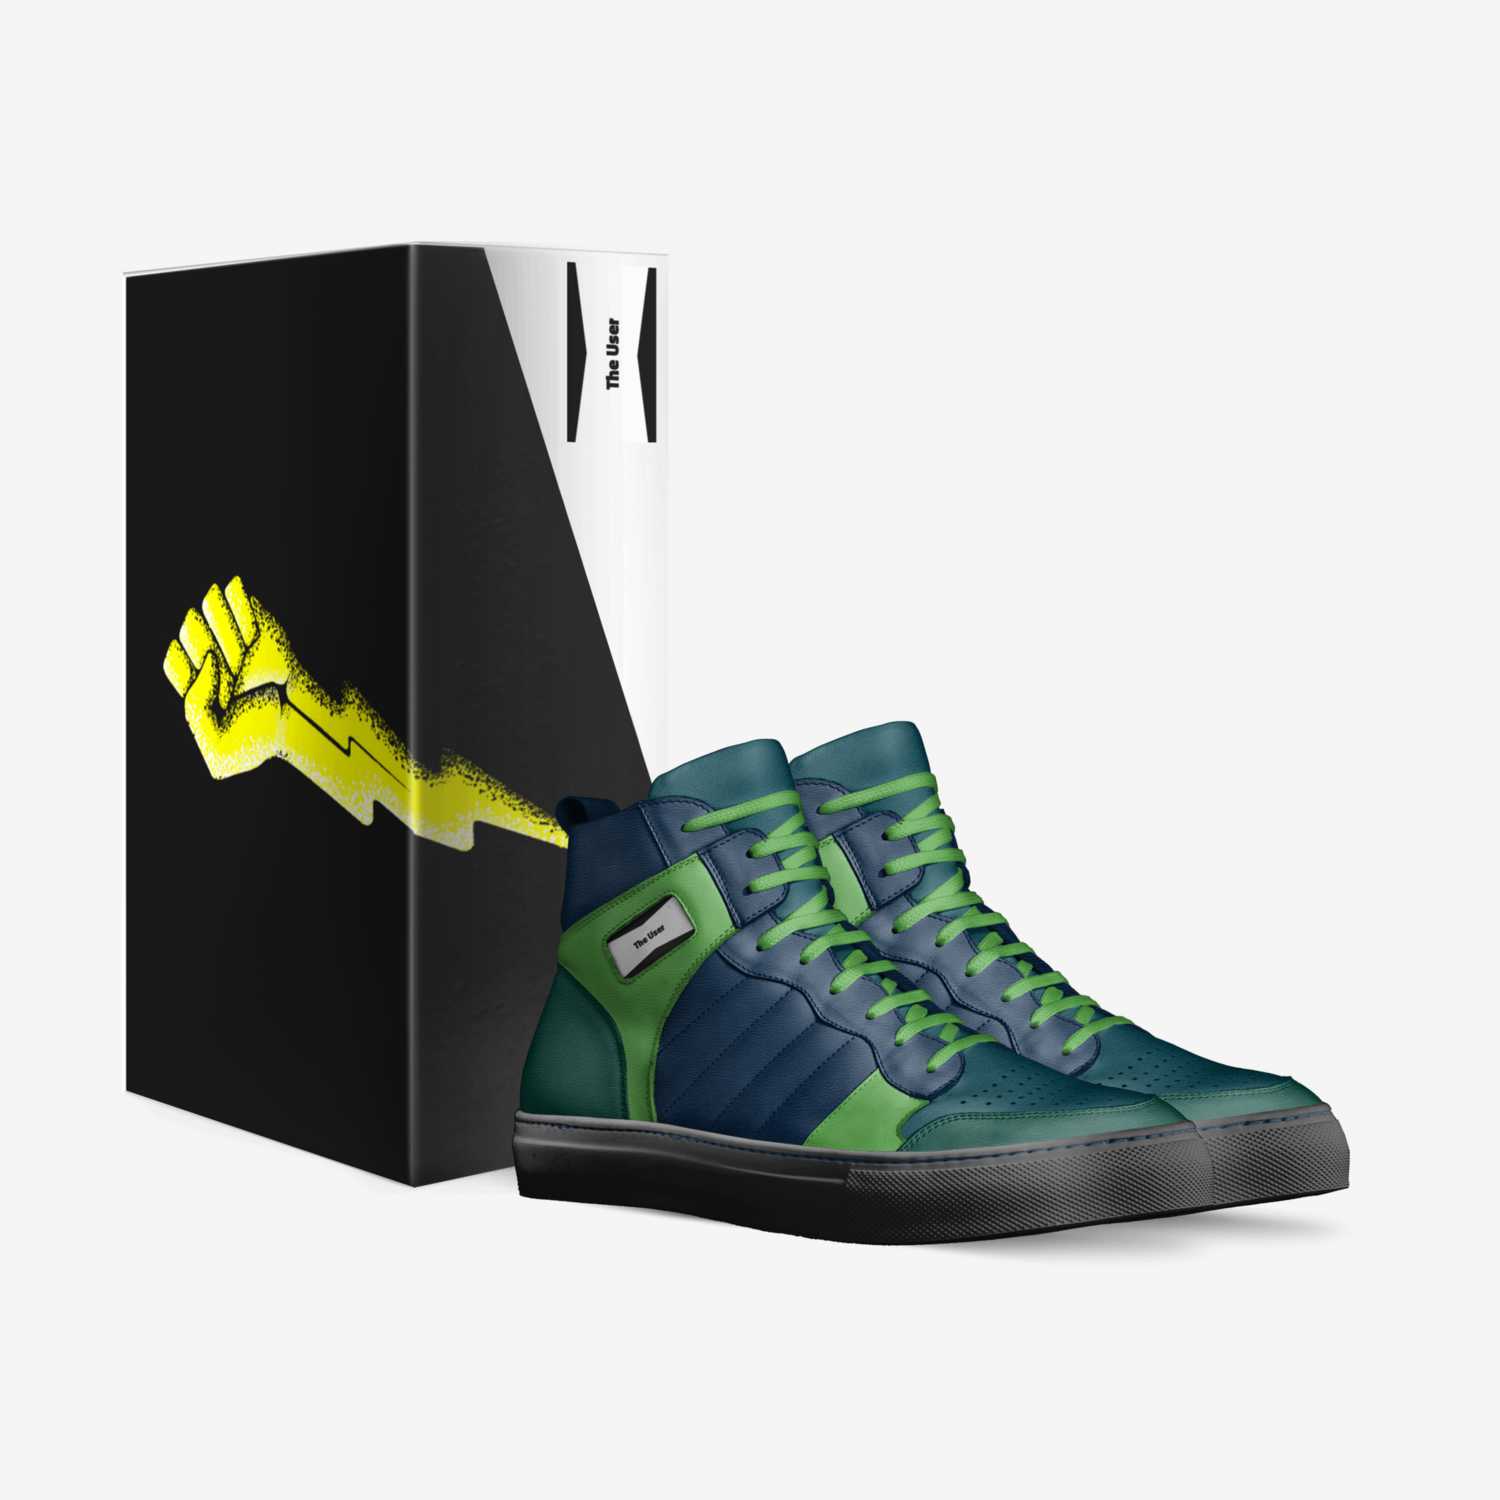 The User custom made in Italy shoes by Ethan Rusiecki | Box view